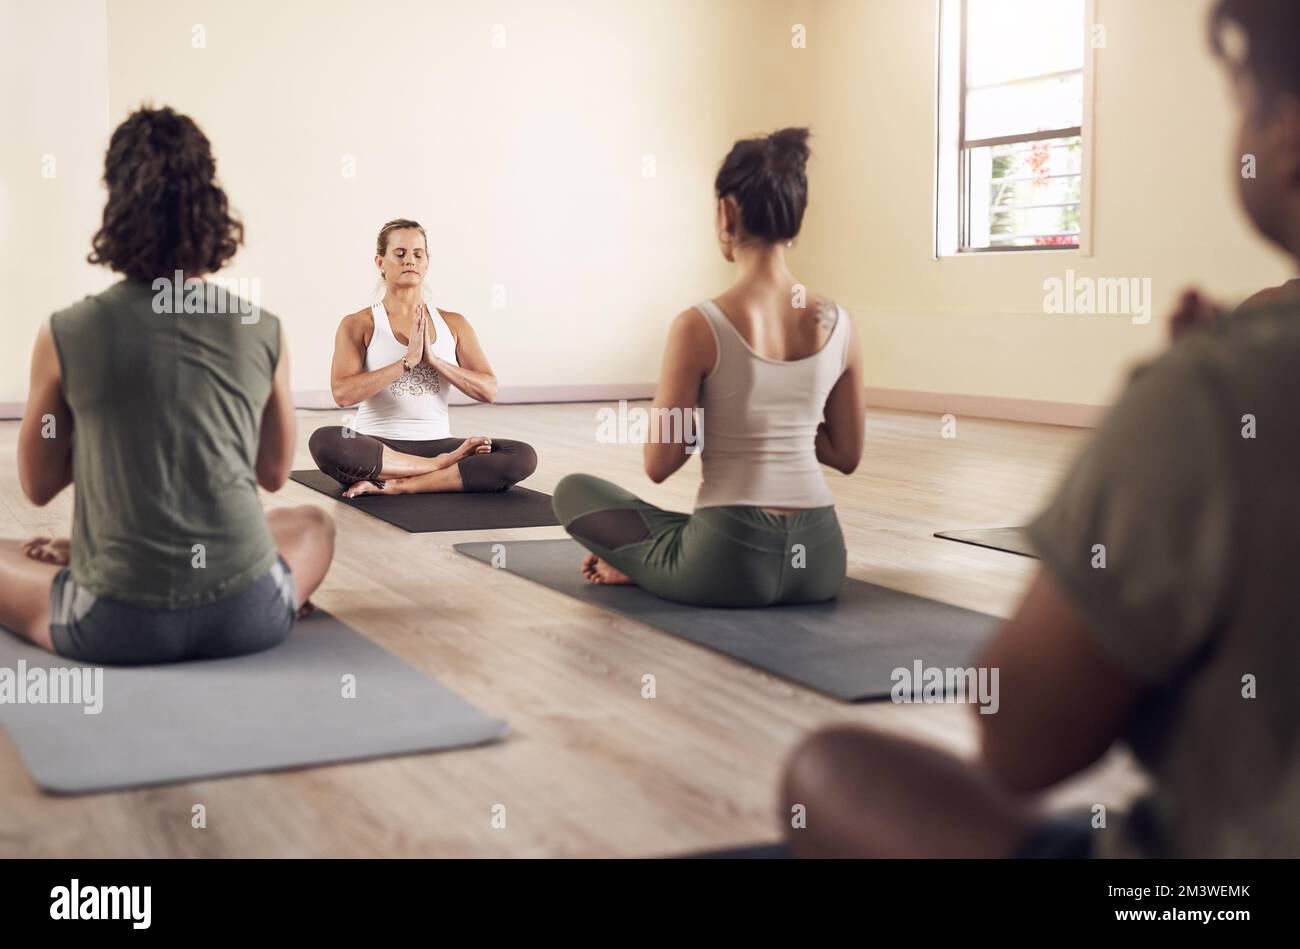 Close your eyes and let the zen take over. a group of young people meditating and working out together in a yoga class. Stock Photo